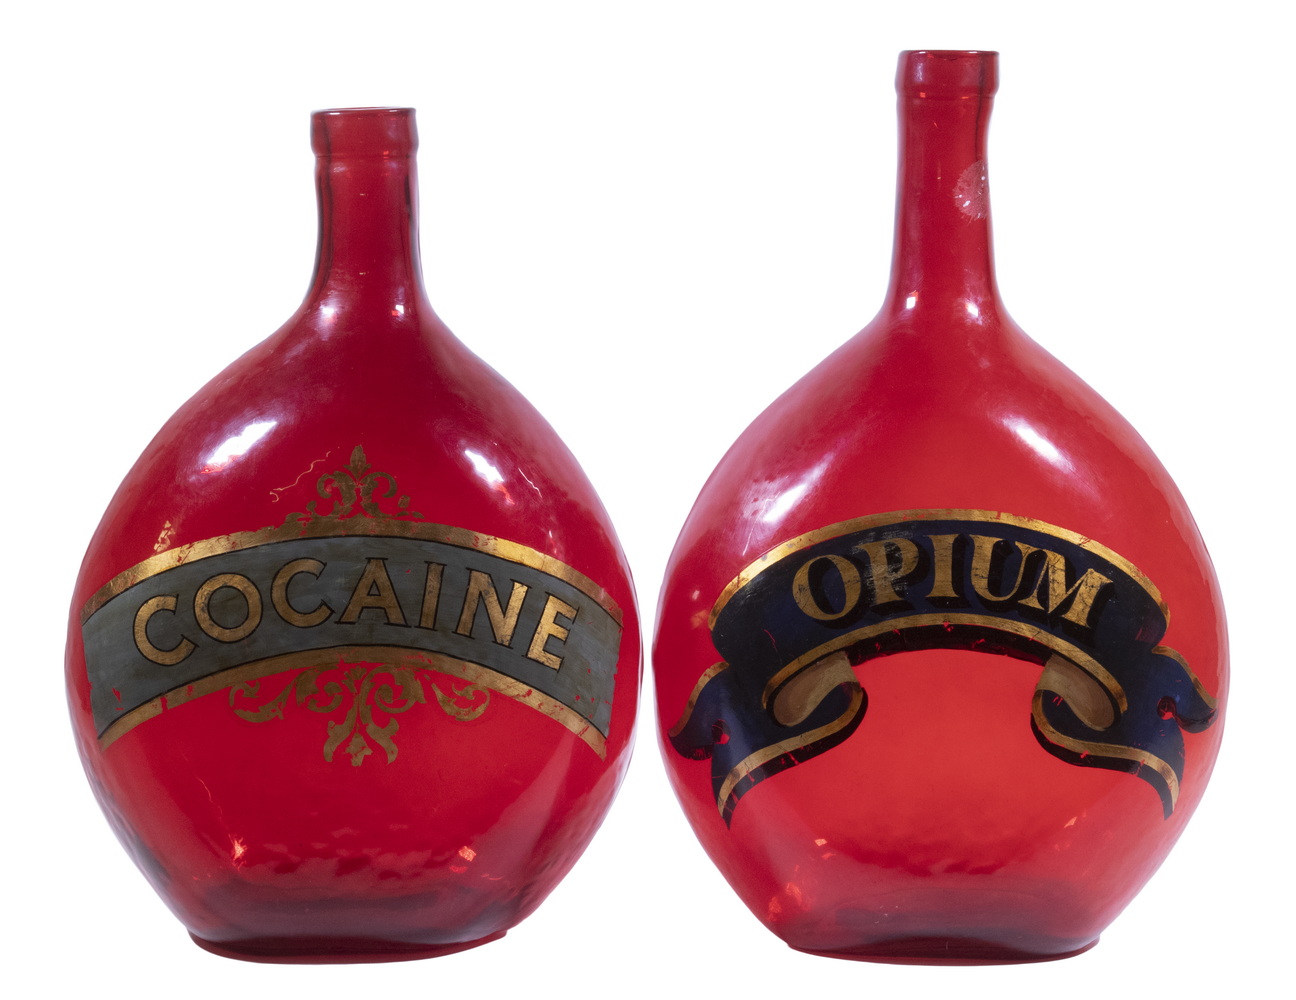  2 RED APOTHECARY JARS COCAINE  29e36f